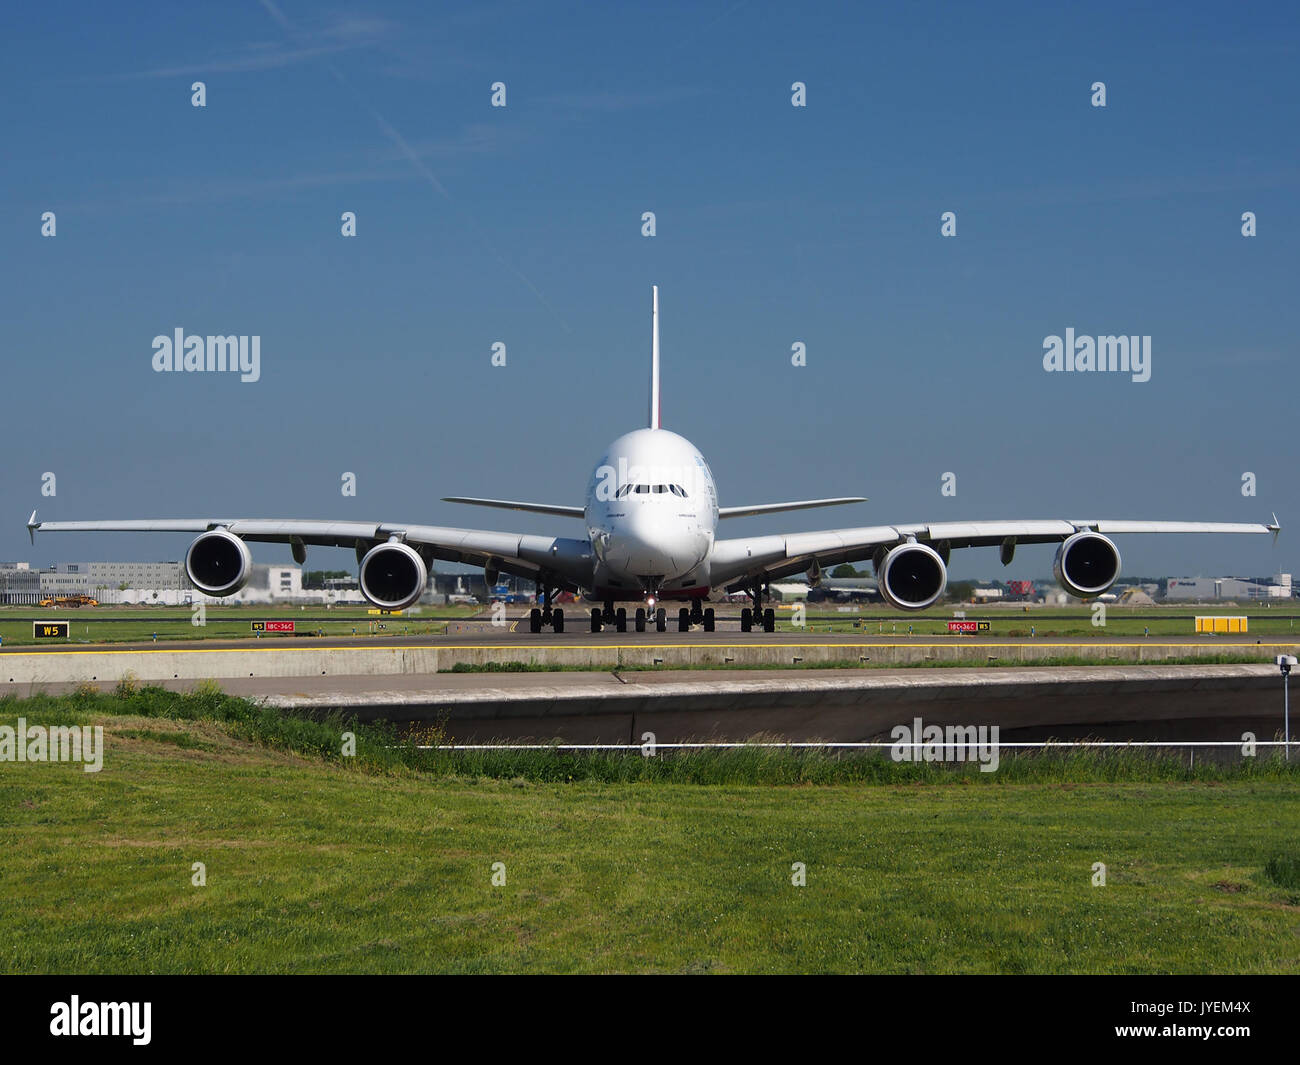 A6 EDI Emirates Airbus A380 861   cn 028 at Schiphol (AMS   EHAM), The Netherlands, 16may2014, pic 01 Stock Photo